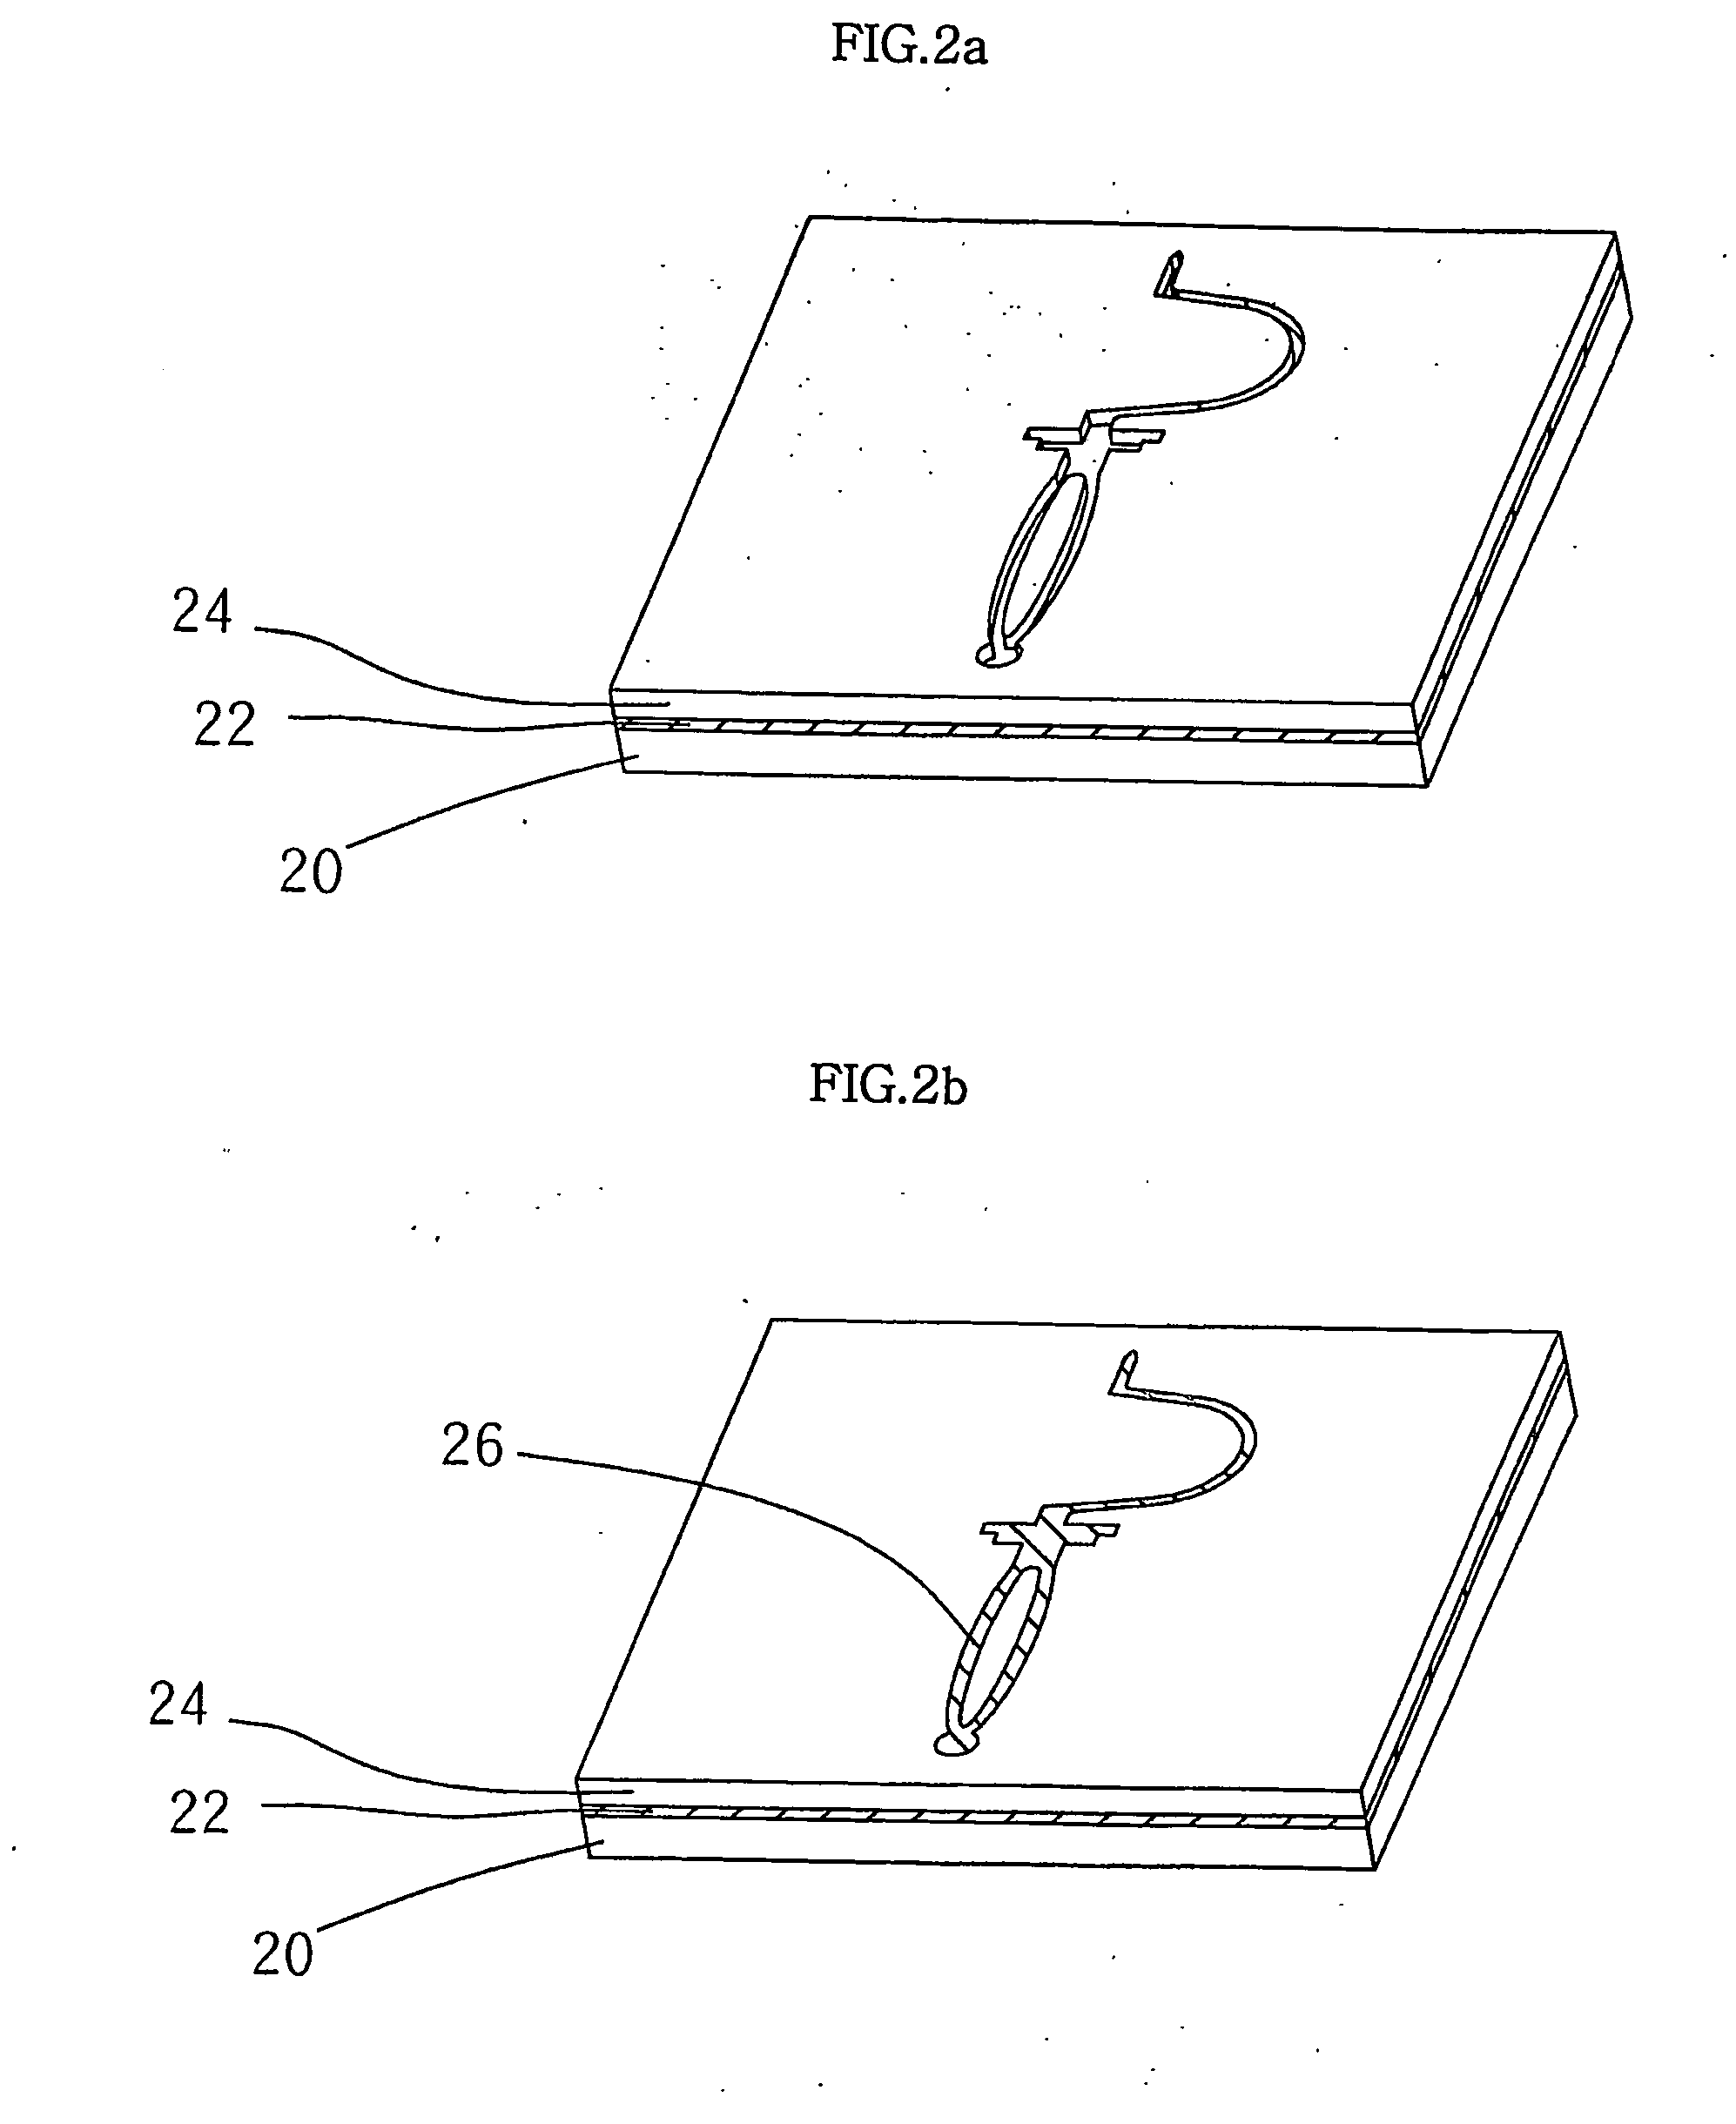 Interconnection device for a printed circuit board, a method of manufacturing the same, and an interconnection assembly having the same